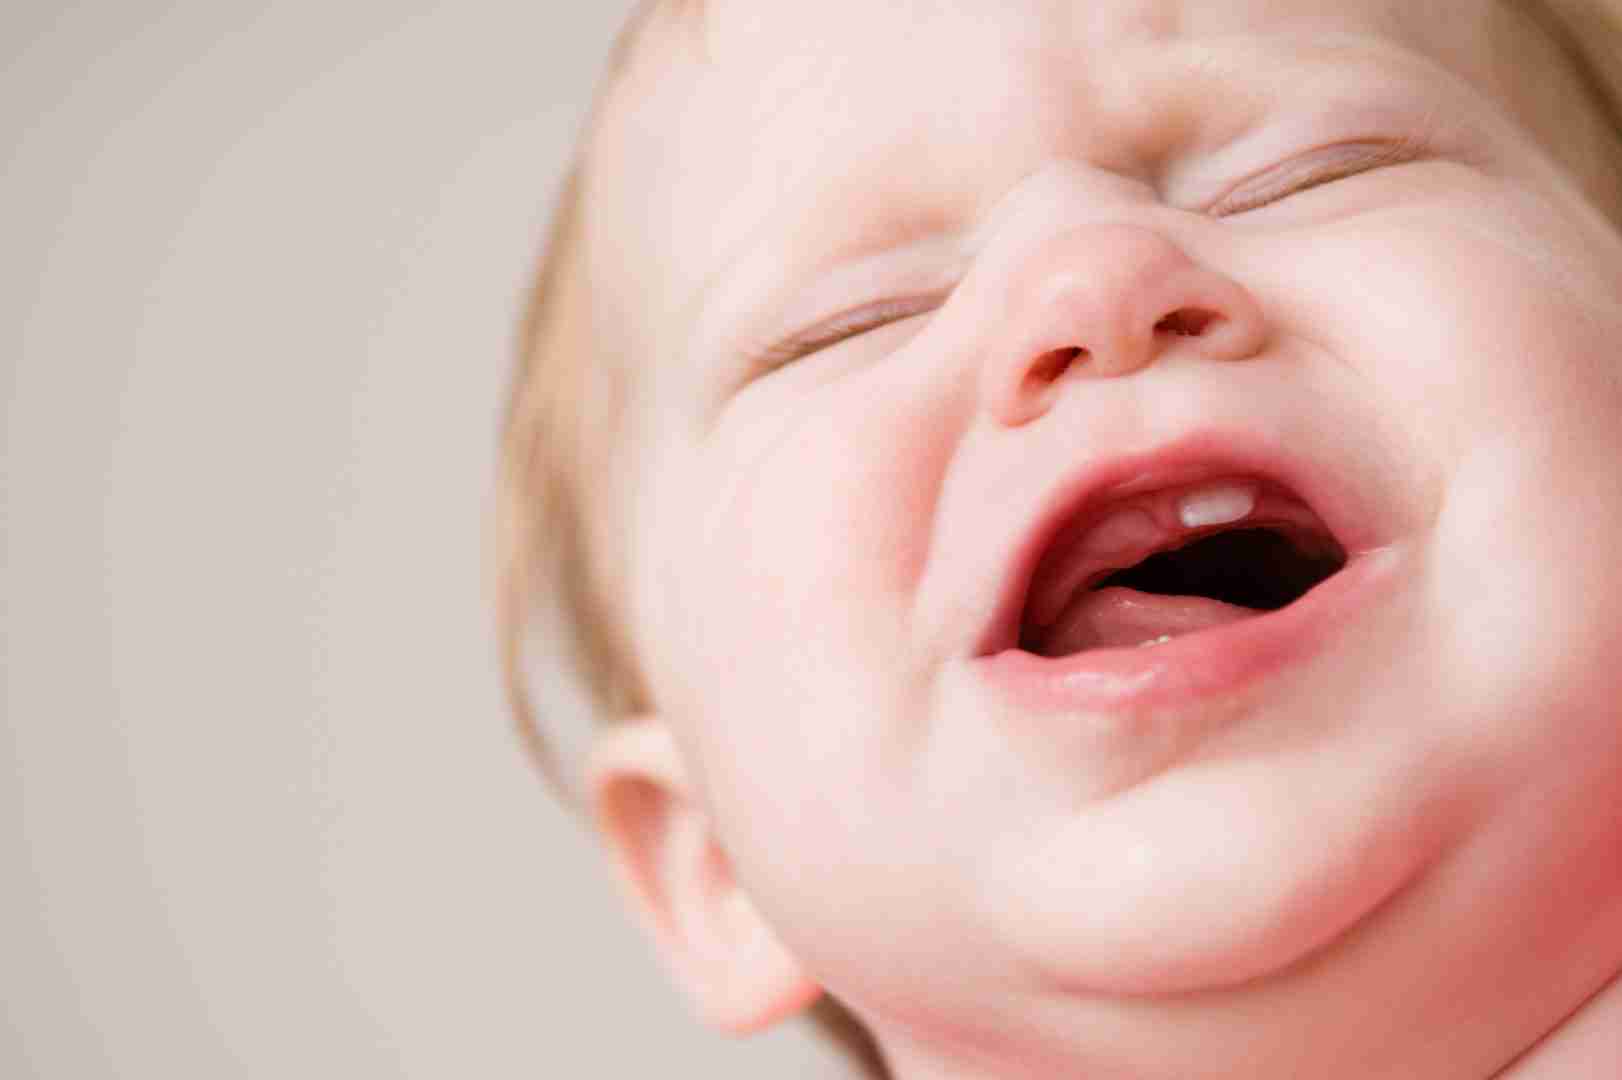 Why teething causes Fever